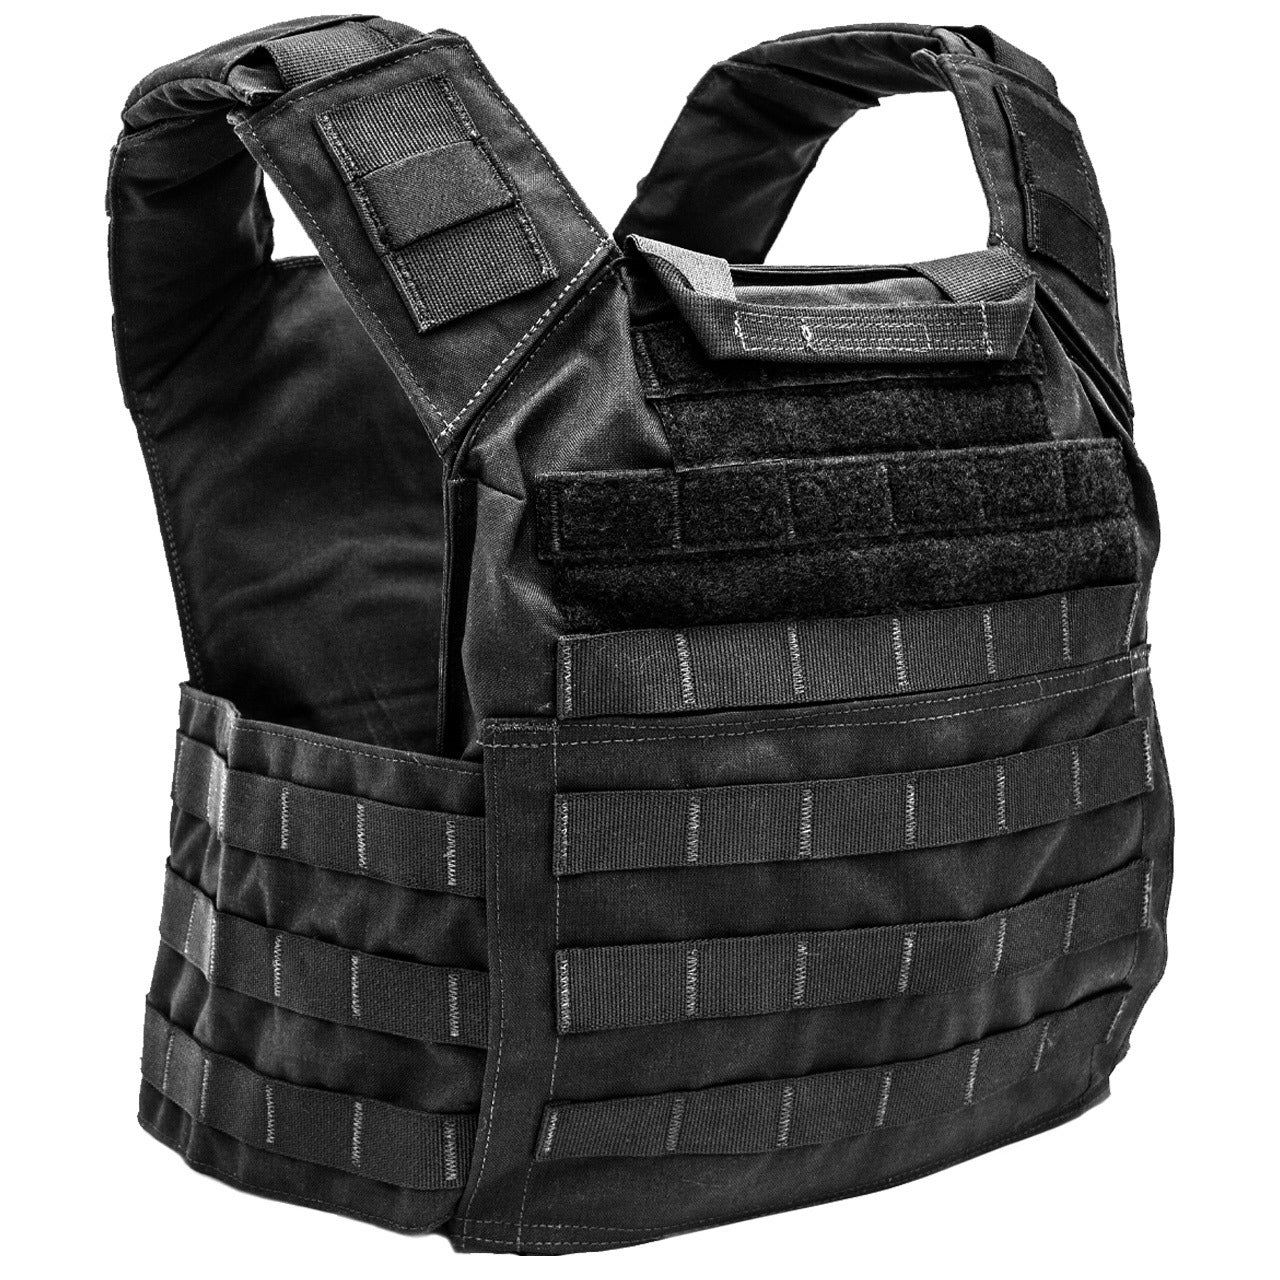 A Shellback Tactical Banshee Rifle Plate Carrier on a white background.